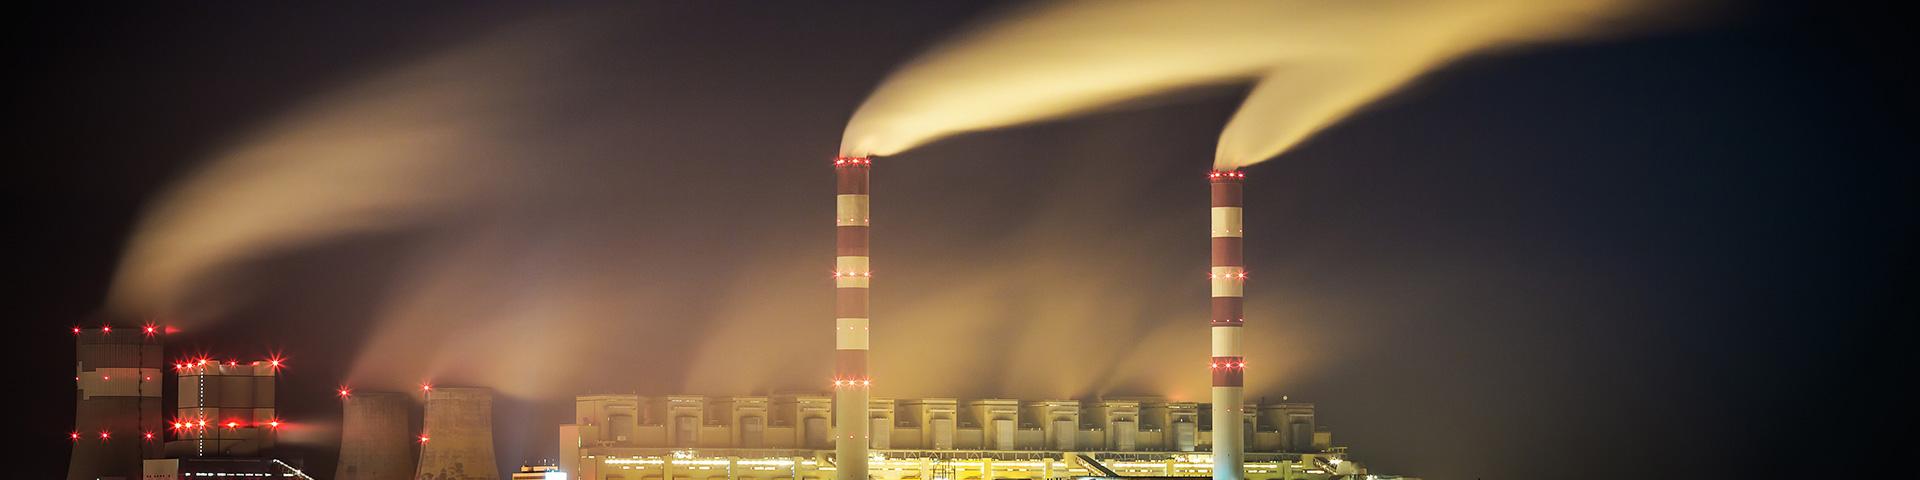 View of steam emissions from a nuclear power plant, Poland